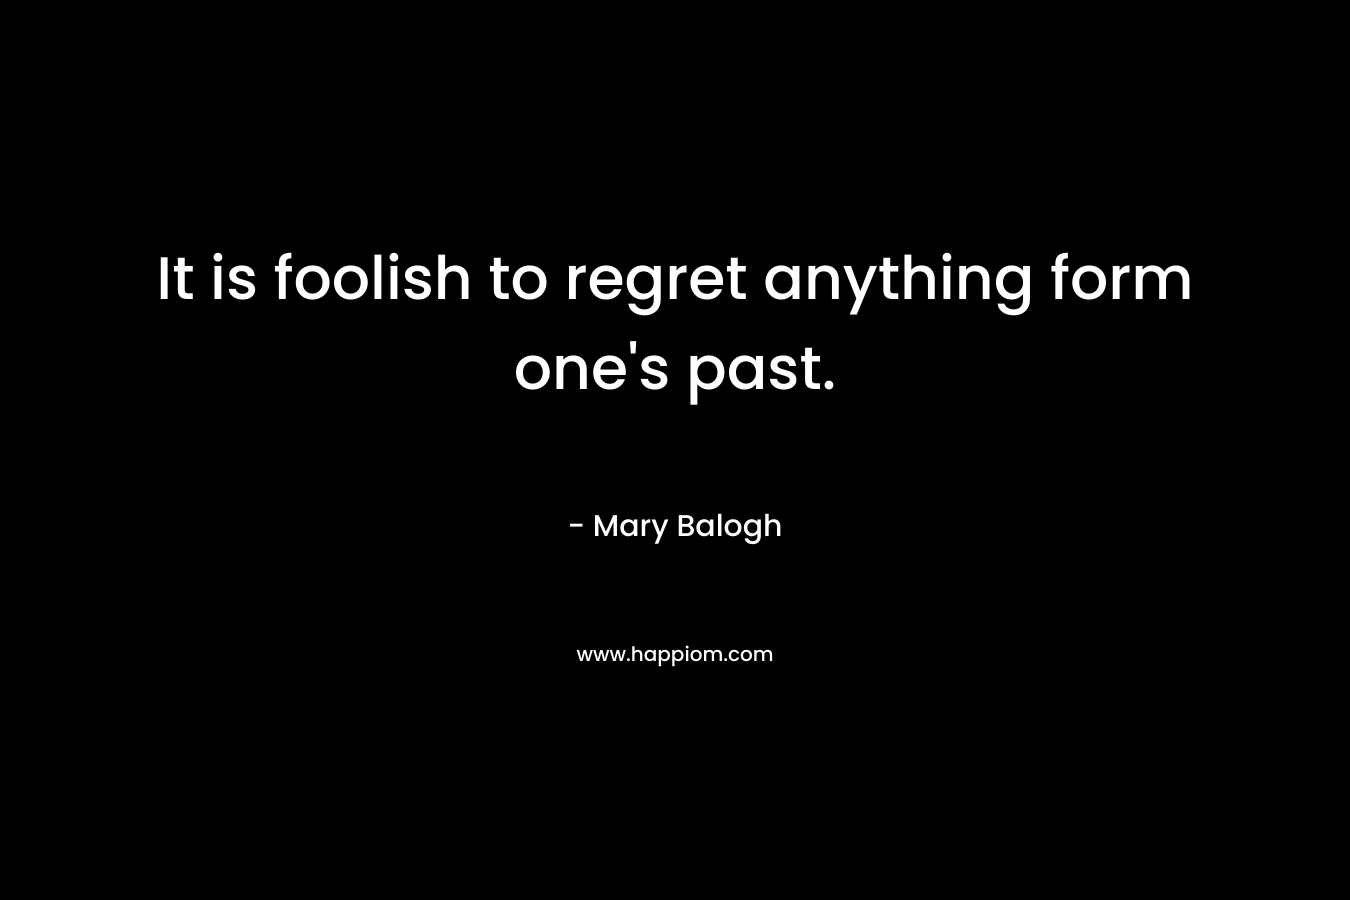 It is foolish to regret anything form one’s past. – Mary Balogh